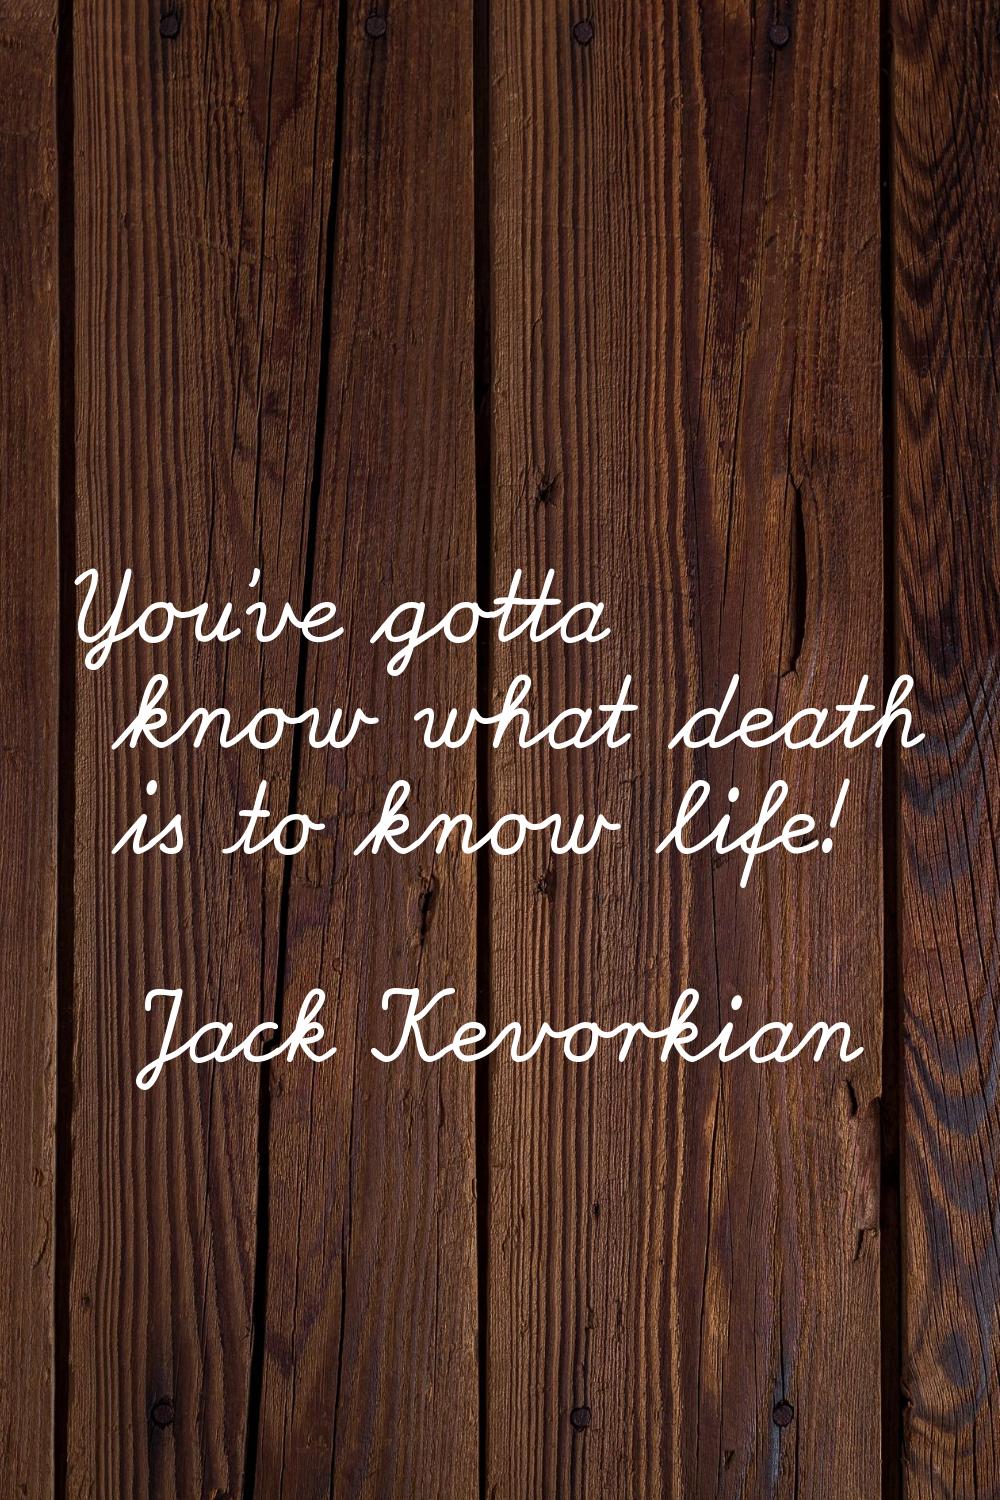 You've gotta know what death is to know life!